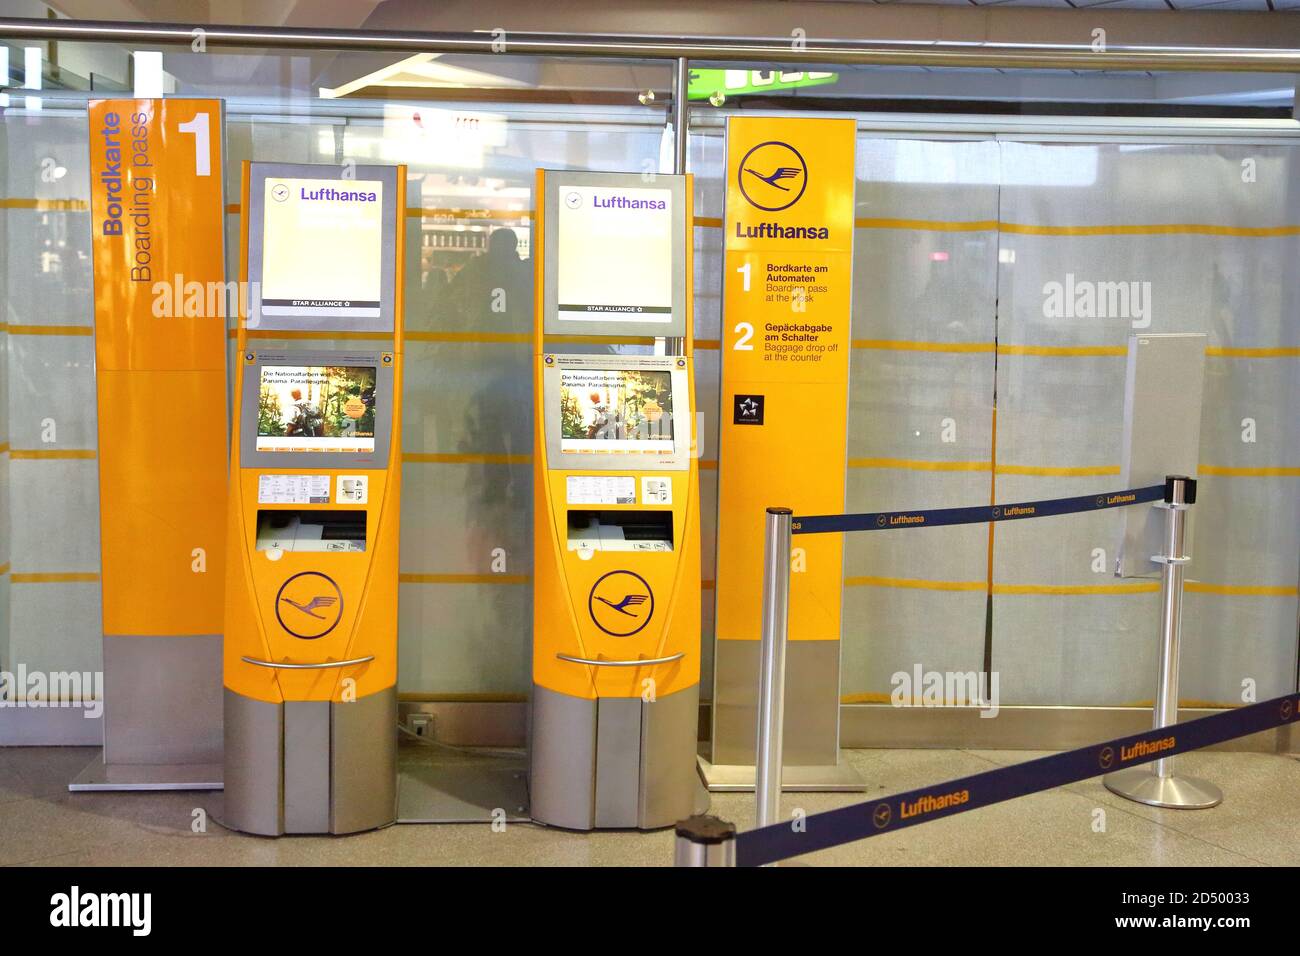 Lufthansa self-service terminal for quick check-in at Berlin Tegel Airport, Germany Stock Photo